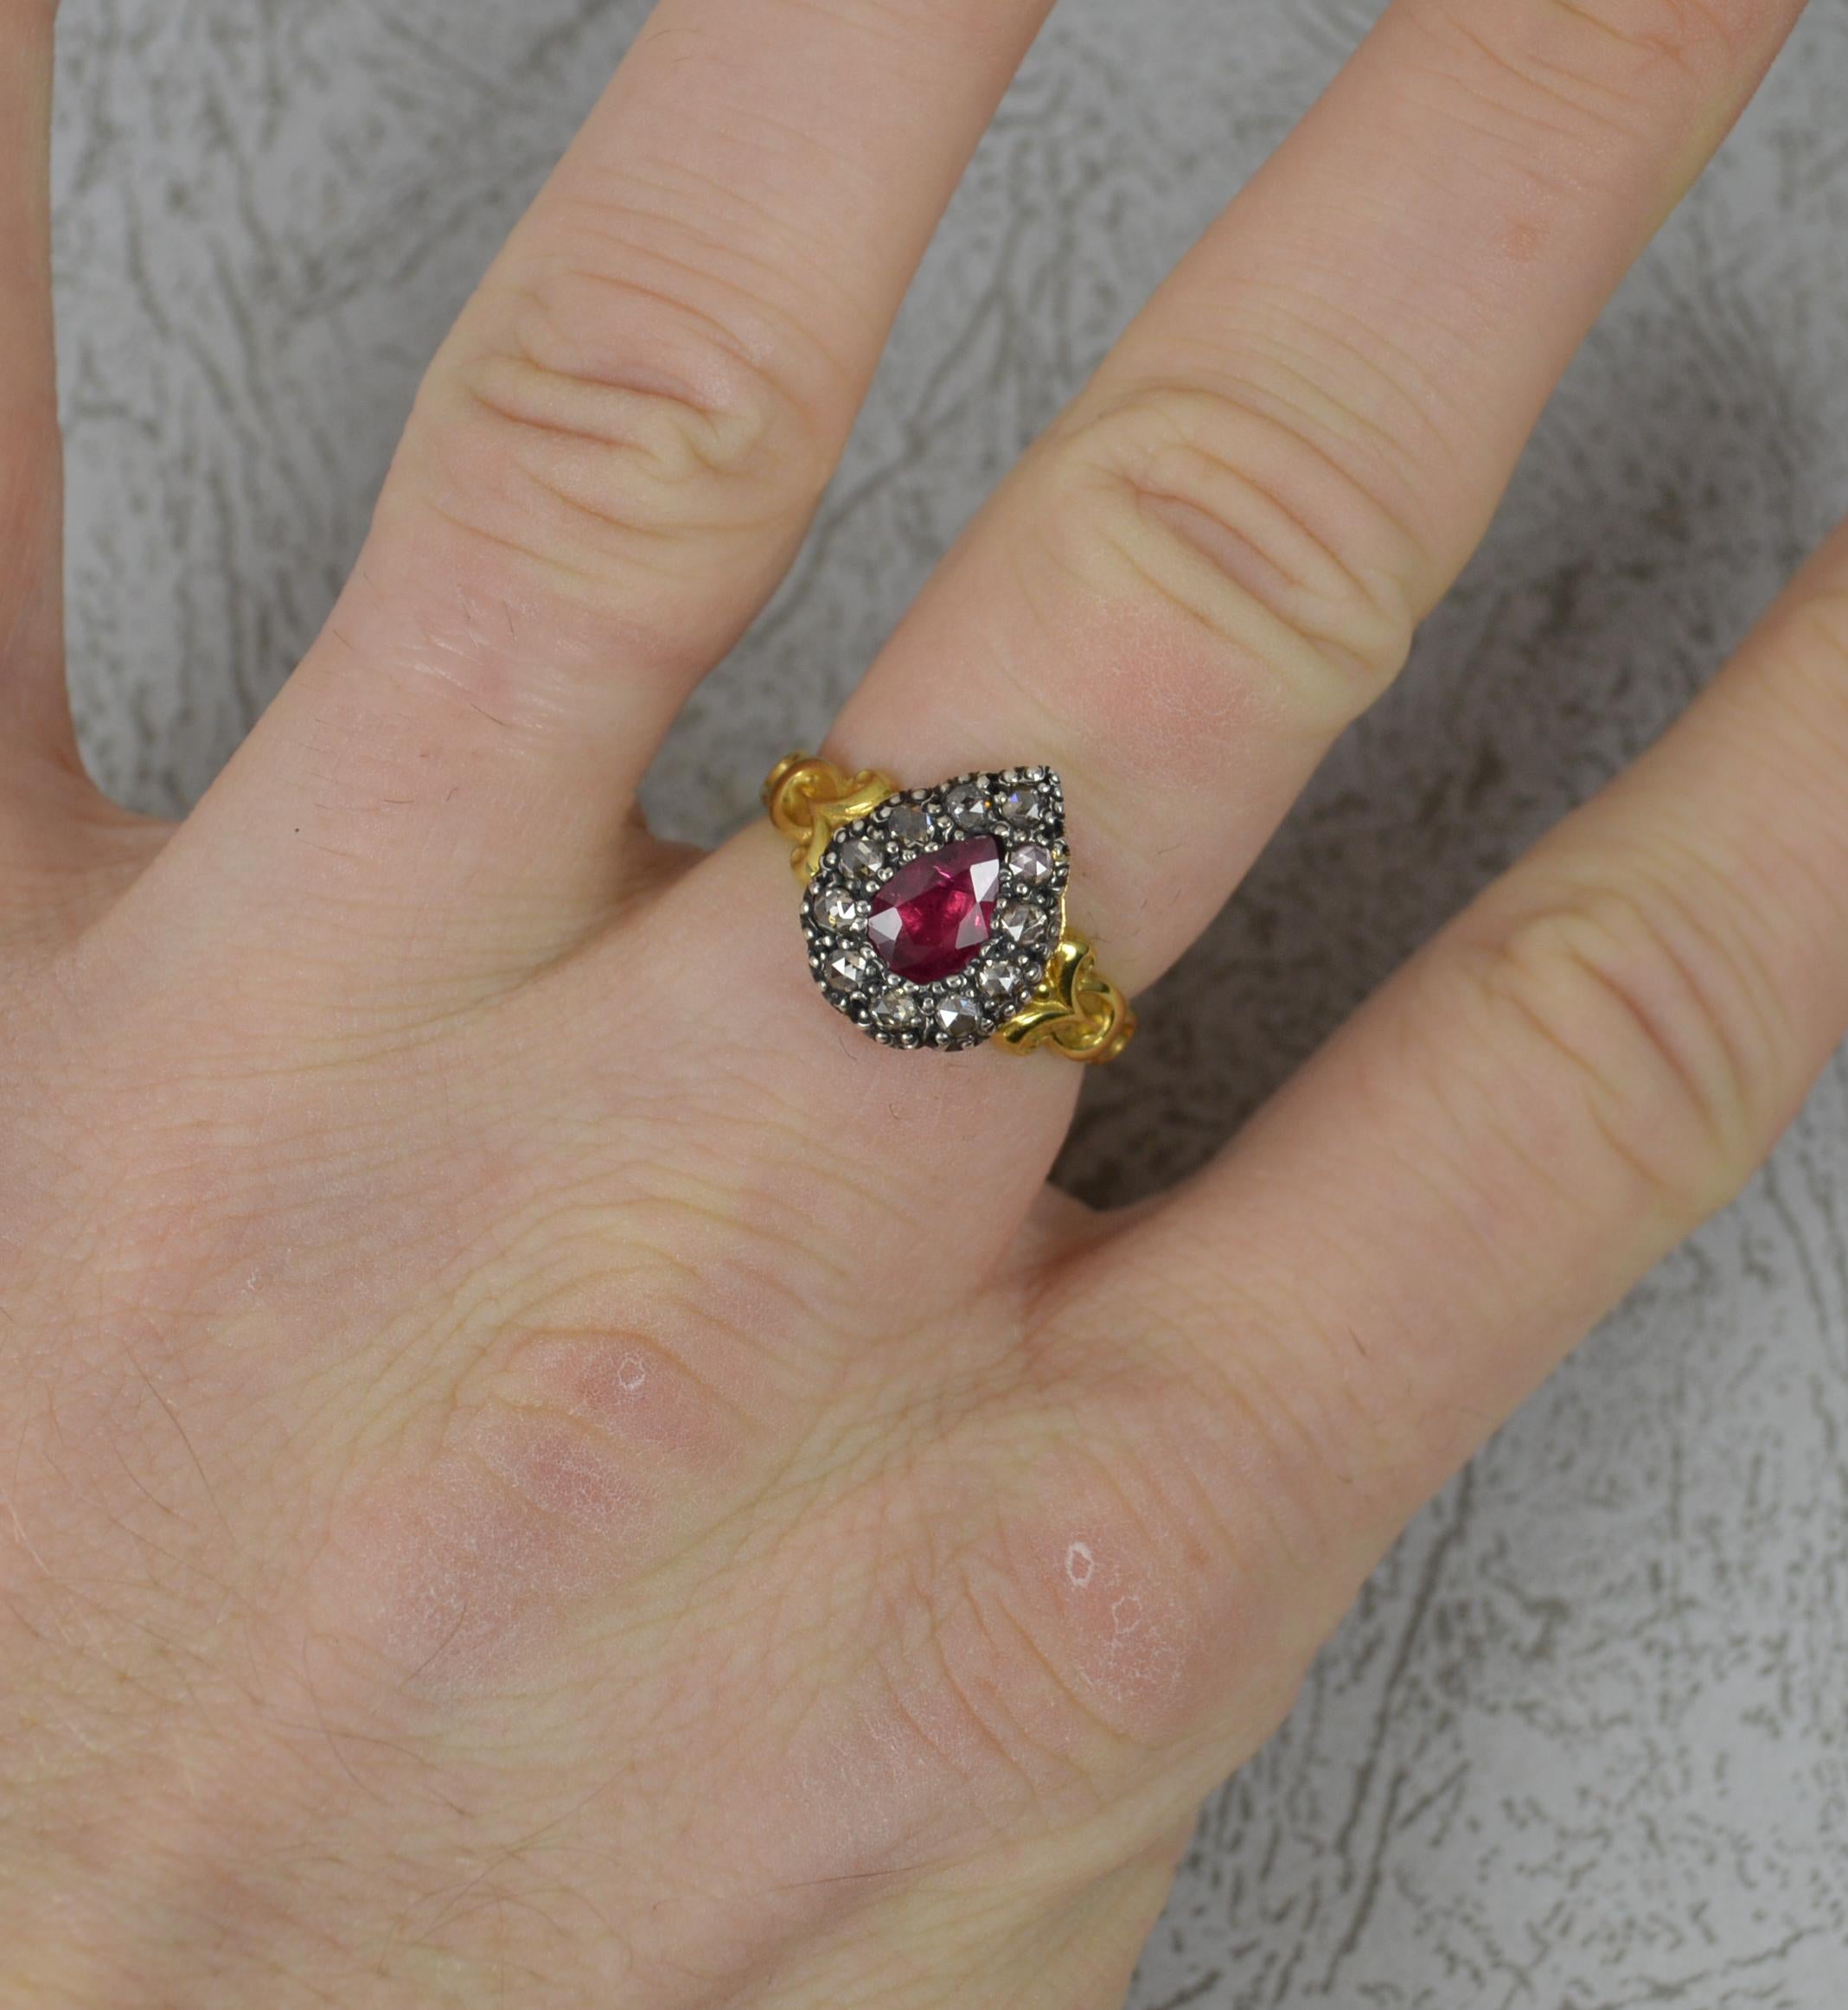 A Georgian design contemporary ring.
Solid 18 carat yellow gold shank and silver head setting.
Set with a pear shape 5mm x 7.25mm ruby in foiled back setting. Surrounding as 10 rose cut diamonds.
10.8mm x 13.7mm cluster head. Protruding 3mm off the